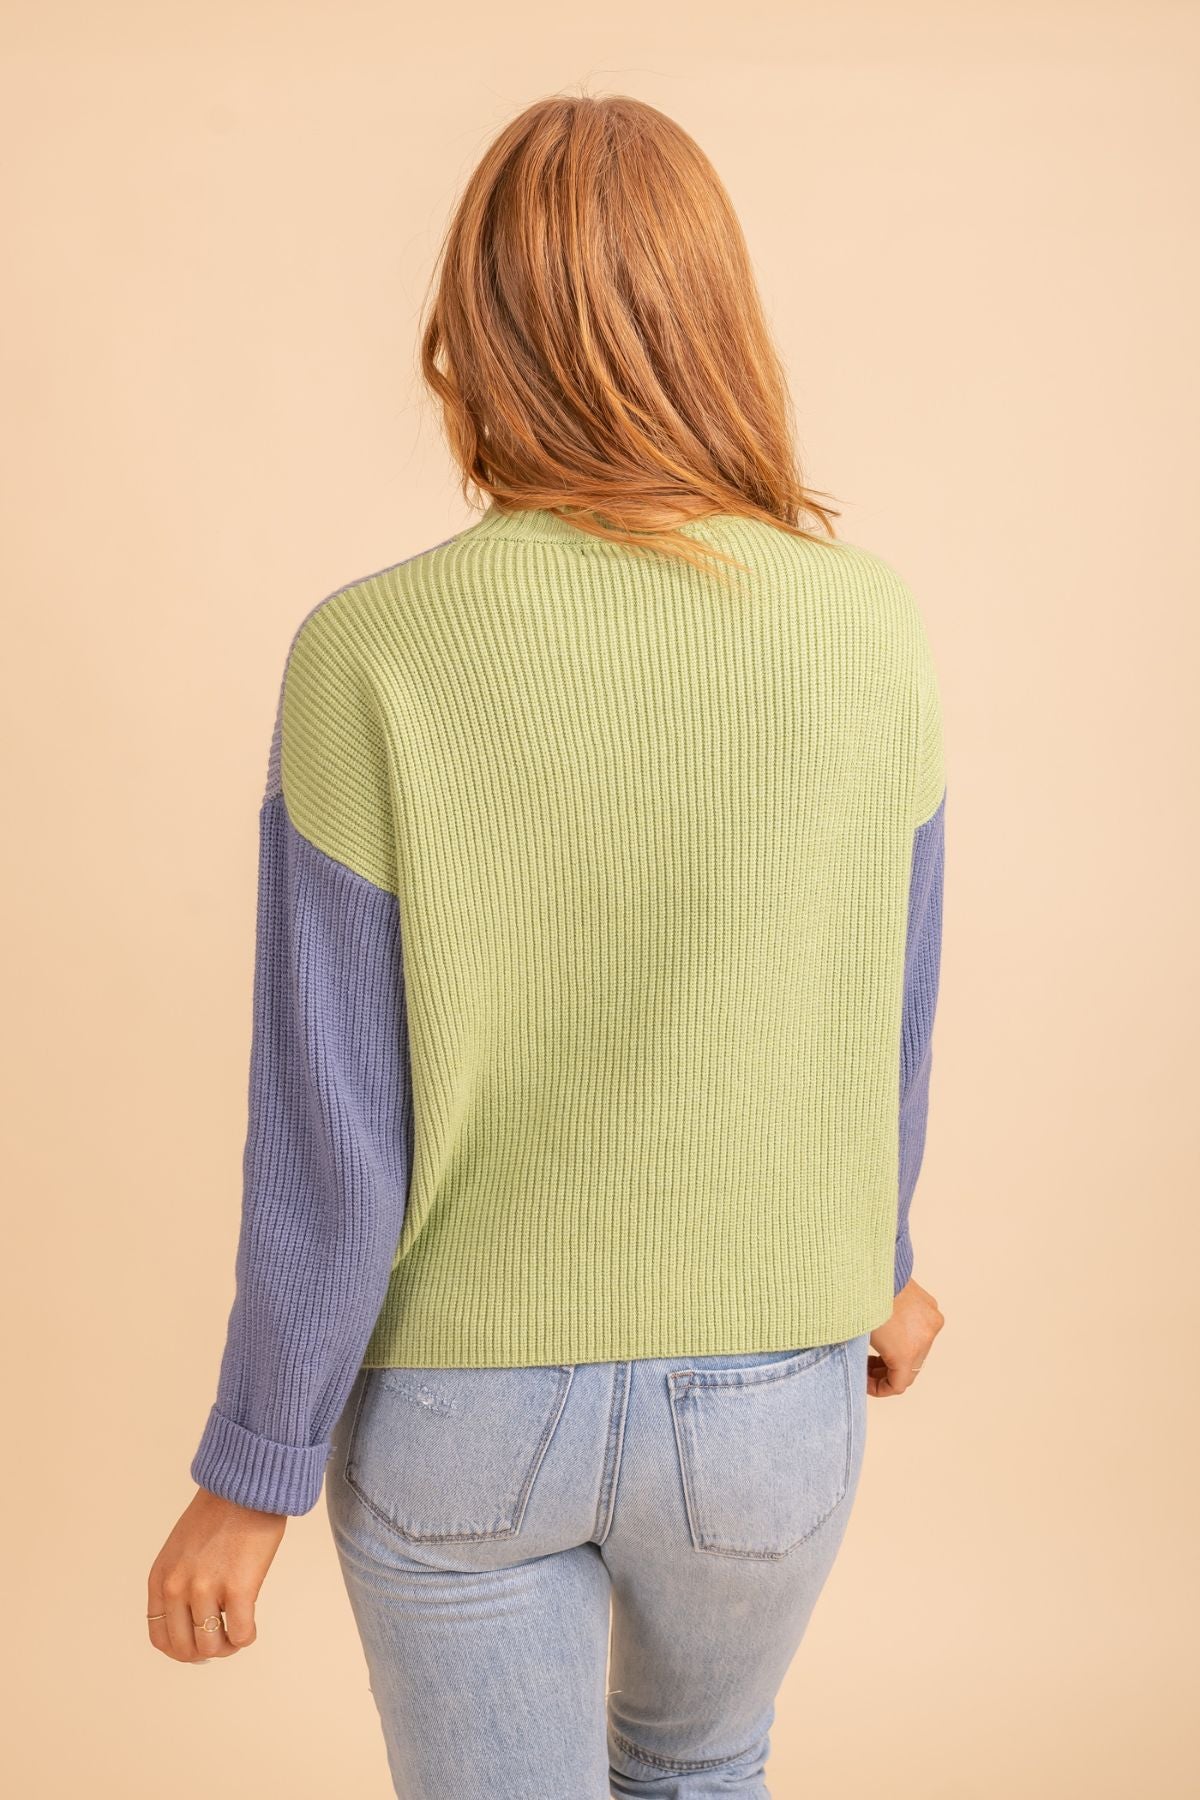 Woman's turtleneck sweater with knit material